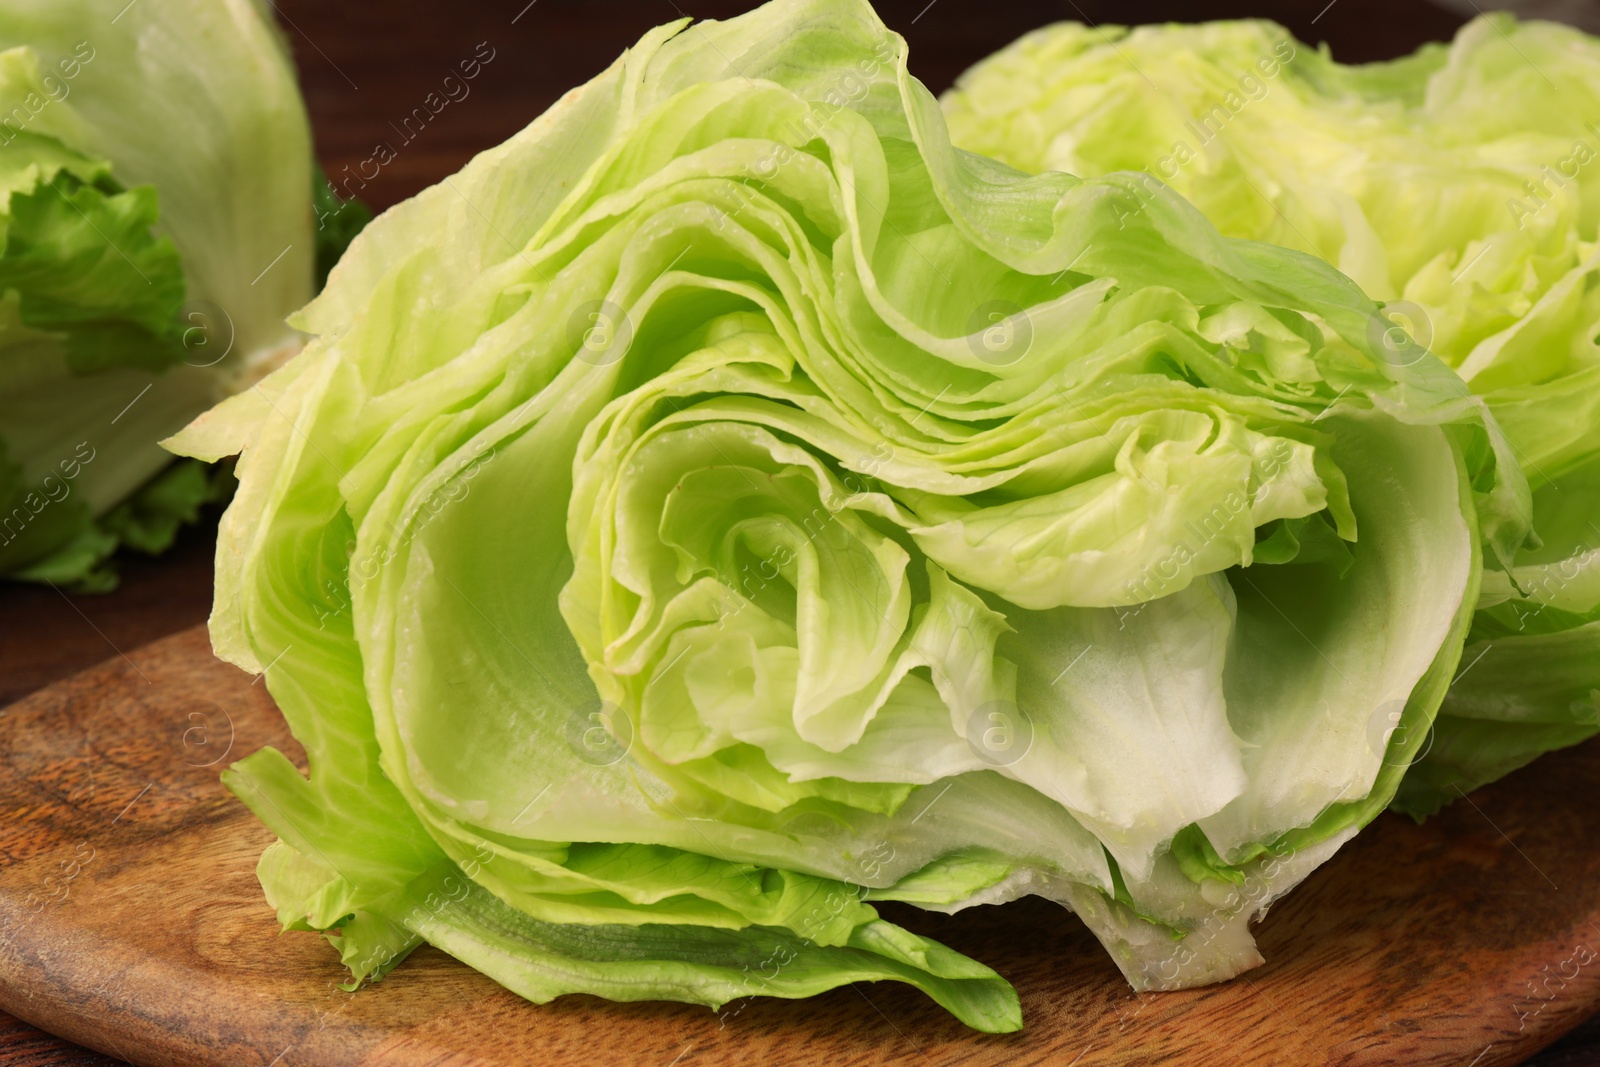 Photo of Board with halves of fresh green iceberg lettuce head on wooden table, closeup